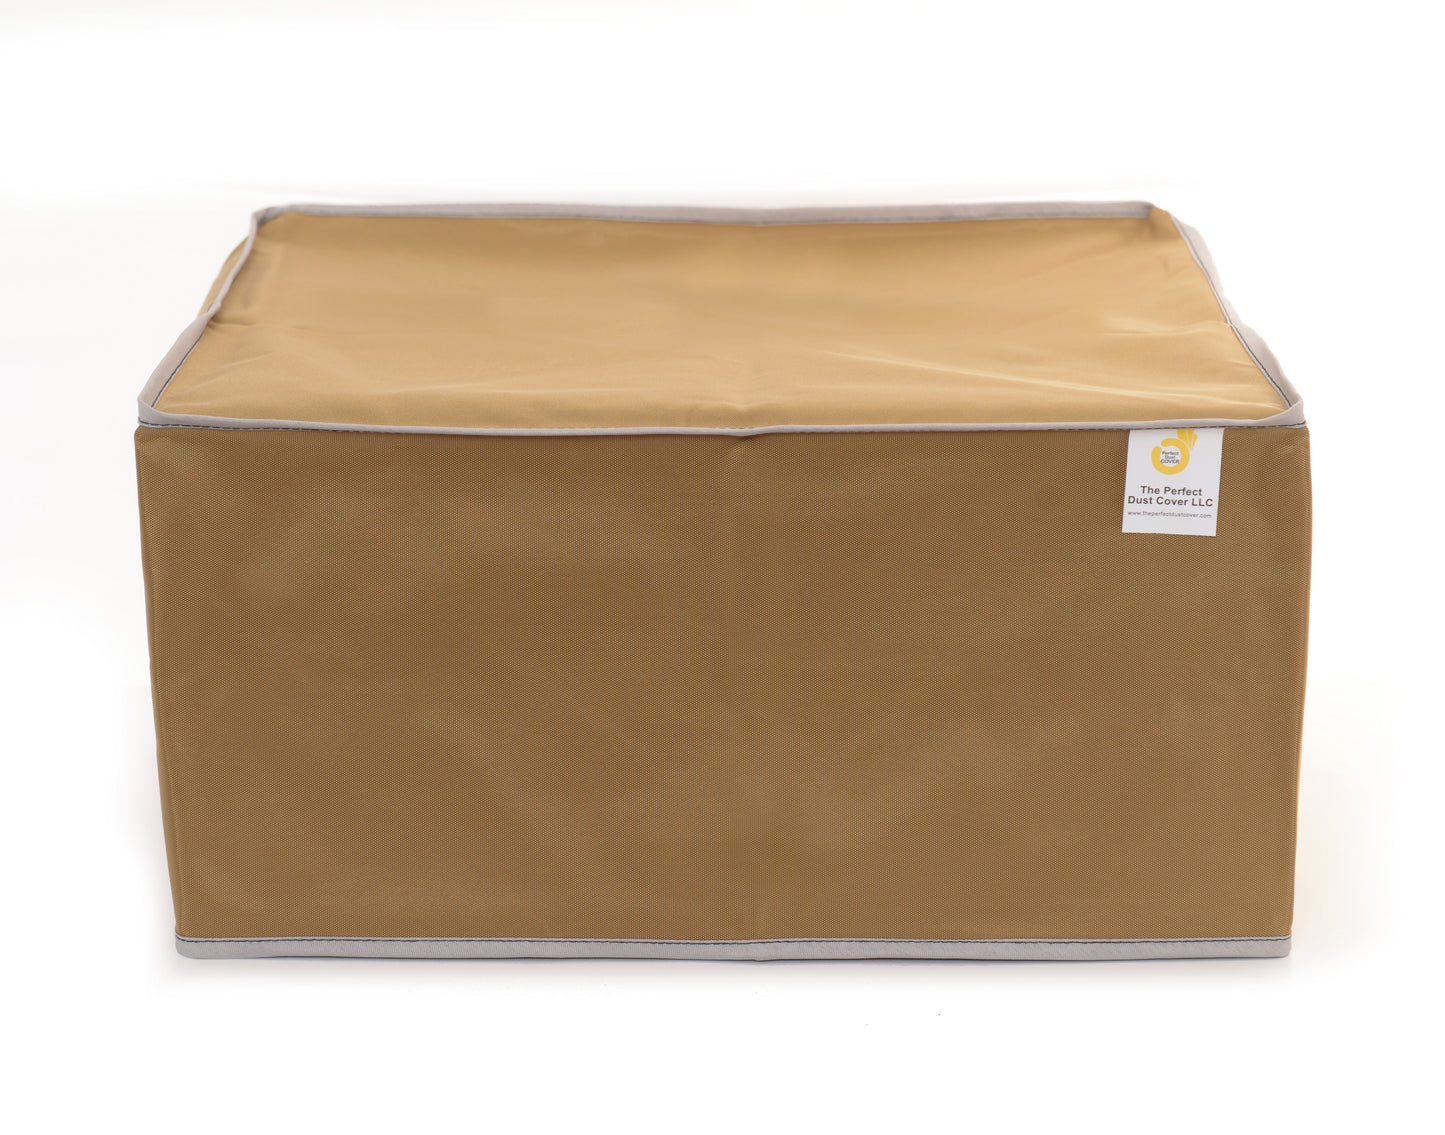 The Perfect Dust Cover, Tan Nylon Cover Compatible with Raise3D DF2 Solution 3D Printer, Anti Static, Double Stitched and Waterproof Dust Cover Dimensions 17.7''W x 15.7''D x 28.7''H by The Perfect Dust Cover LLC